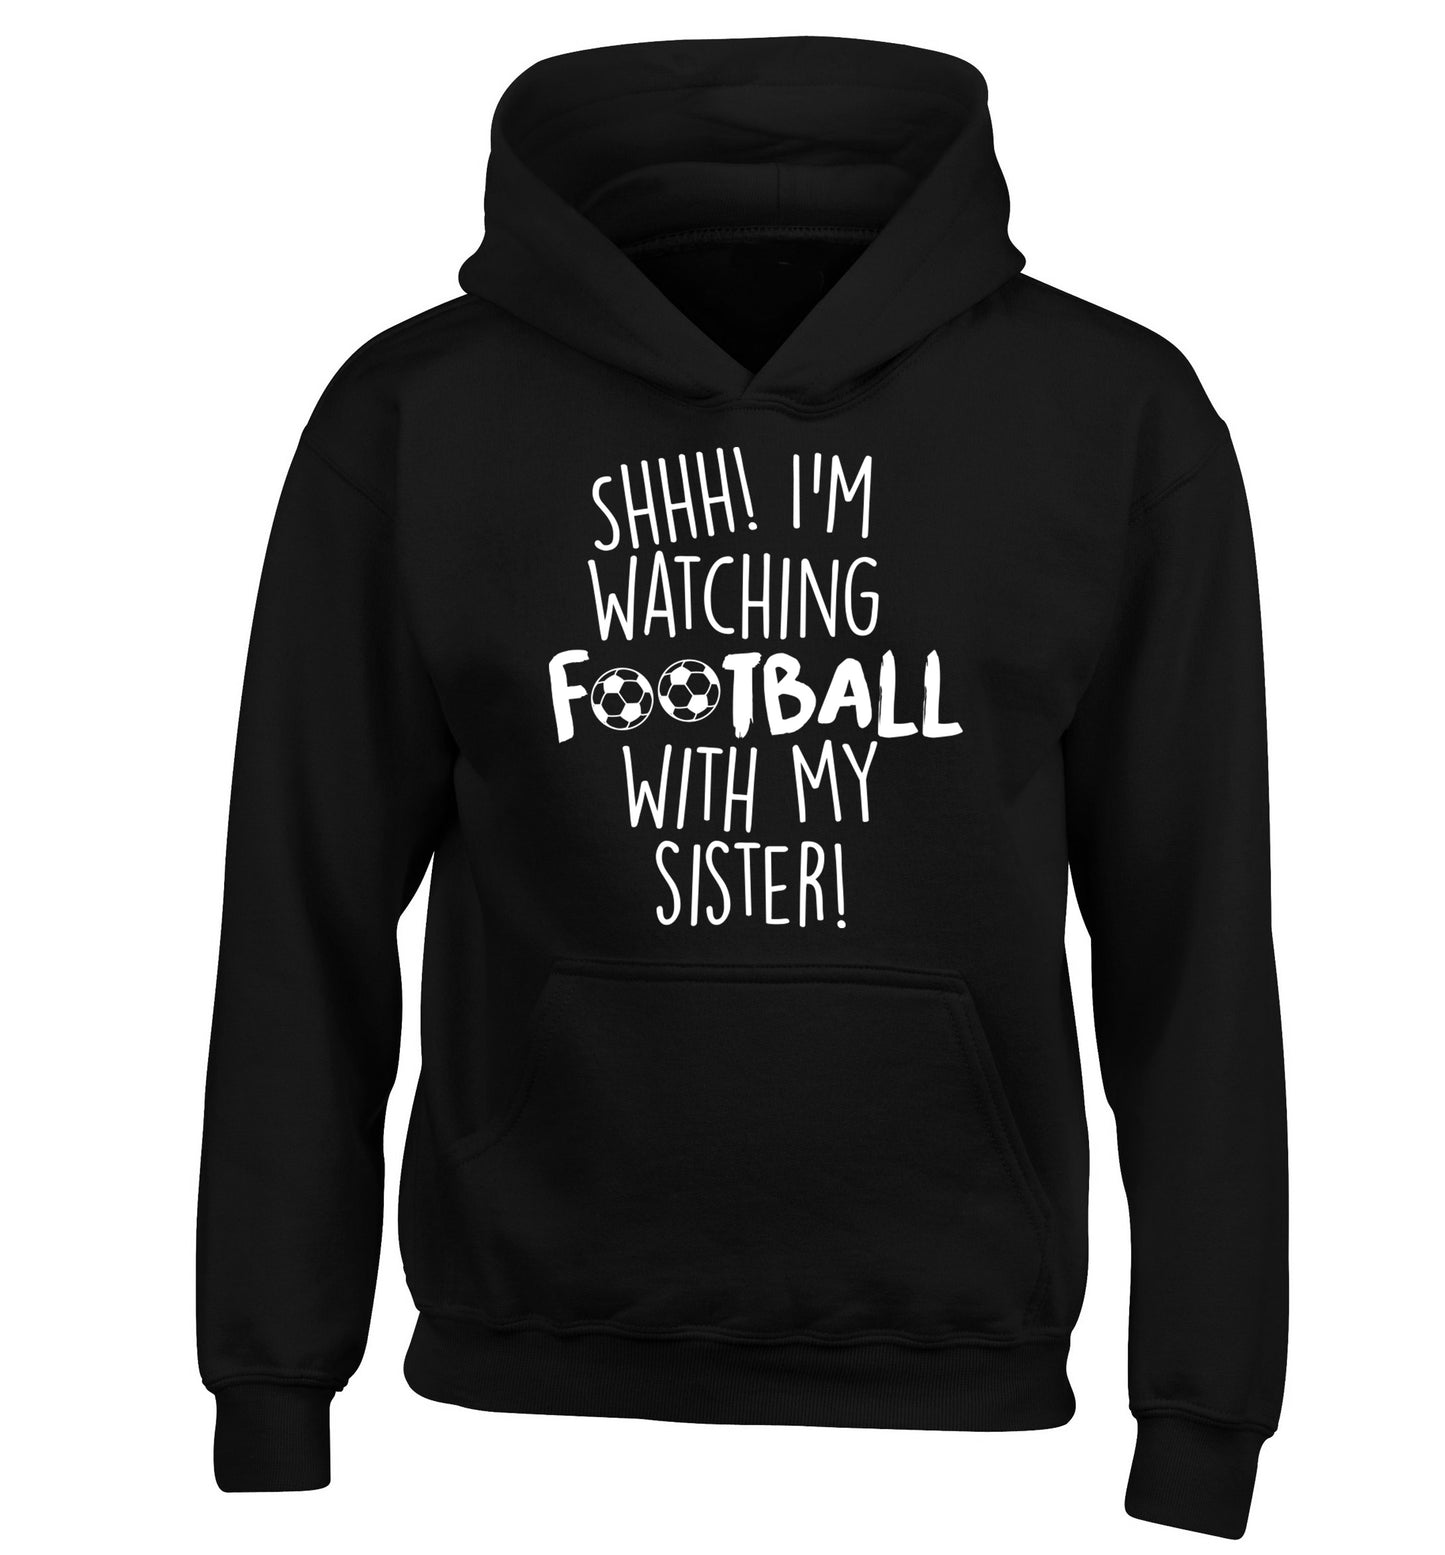 Shhh I'm watching football with my sister children's black hoodie 12-14 Years